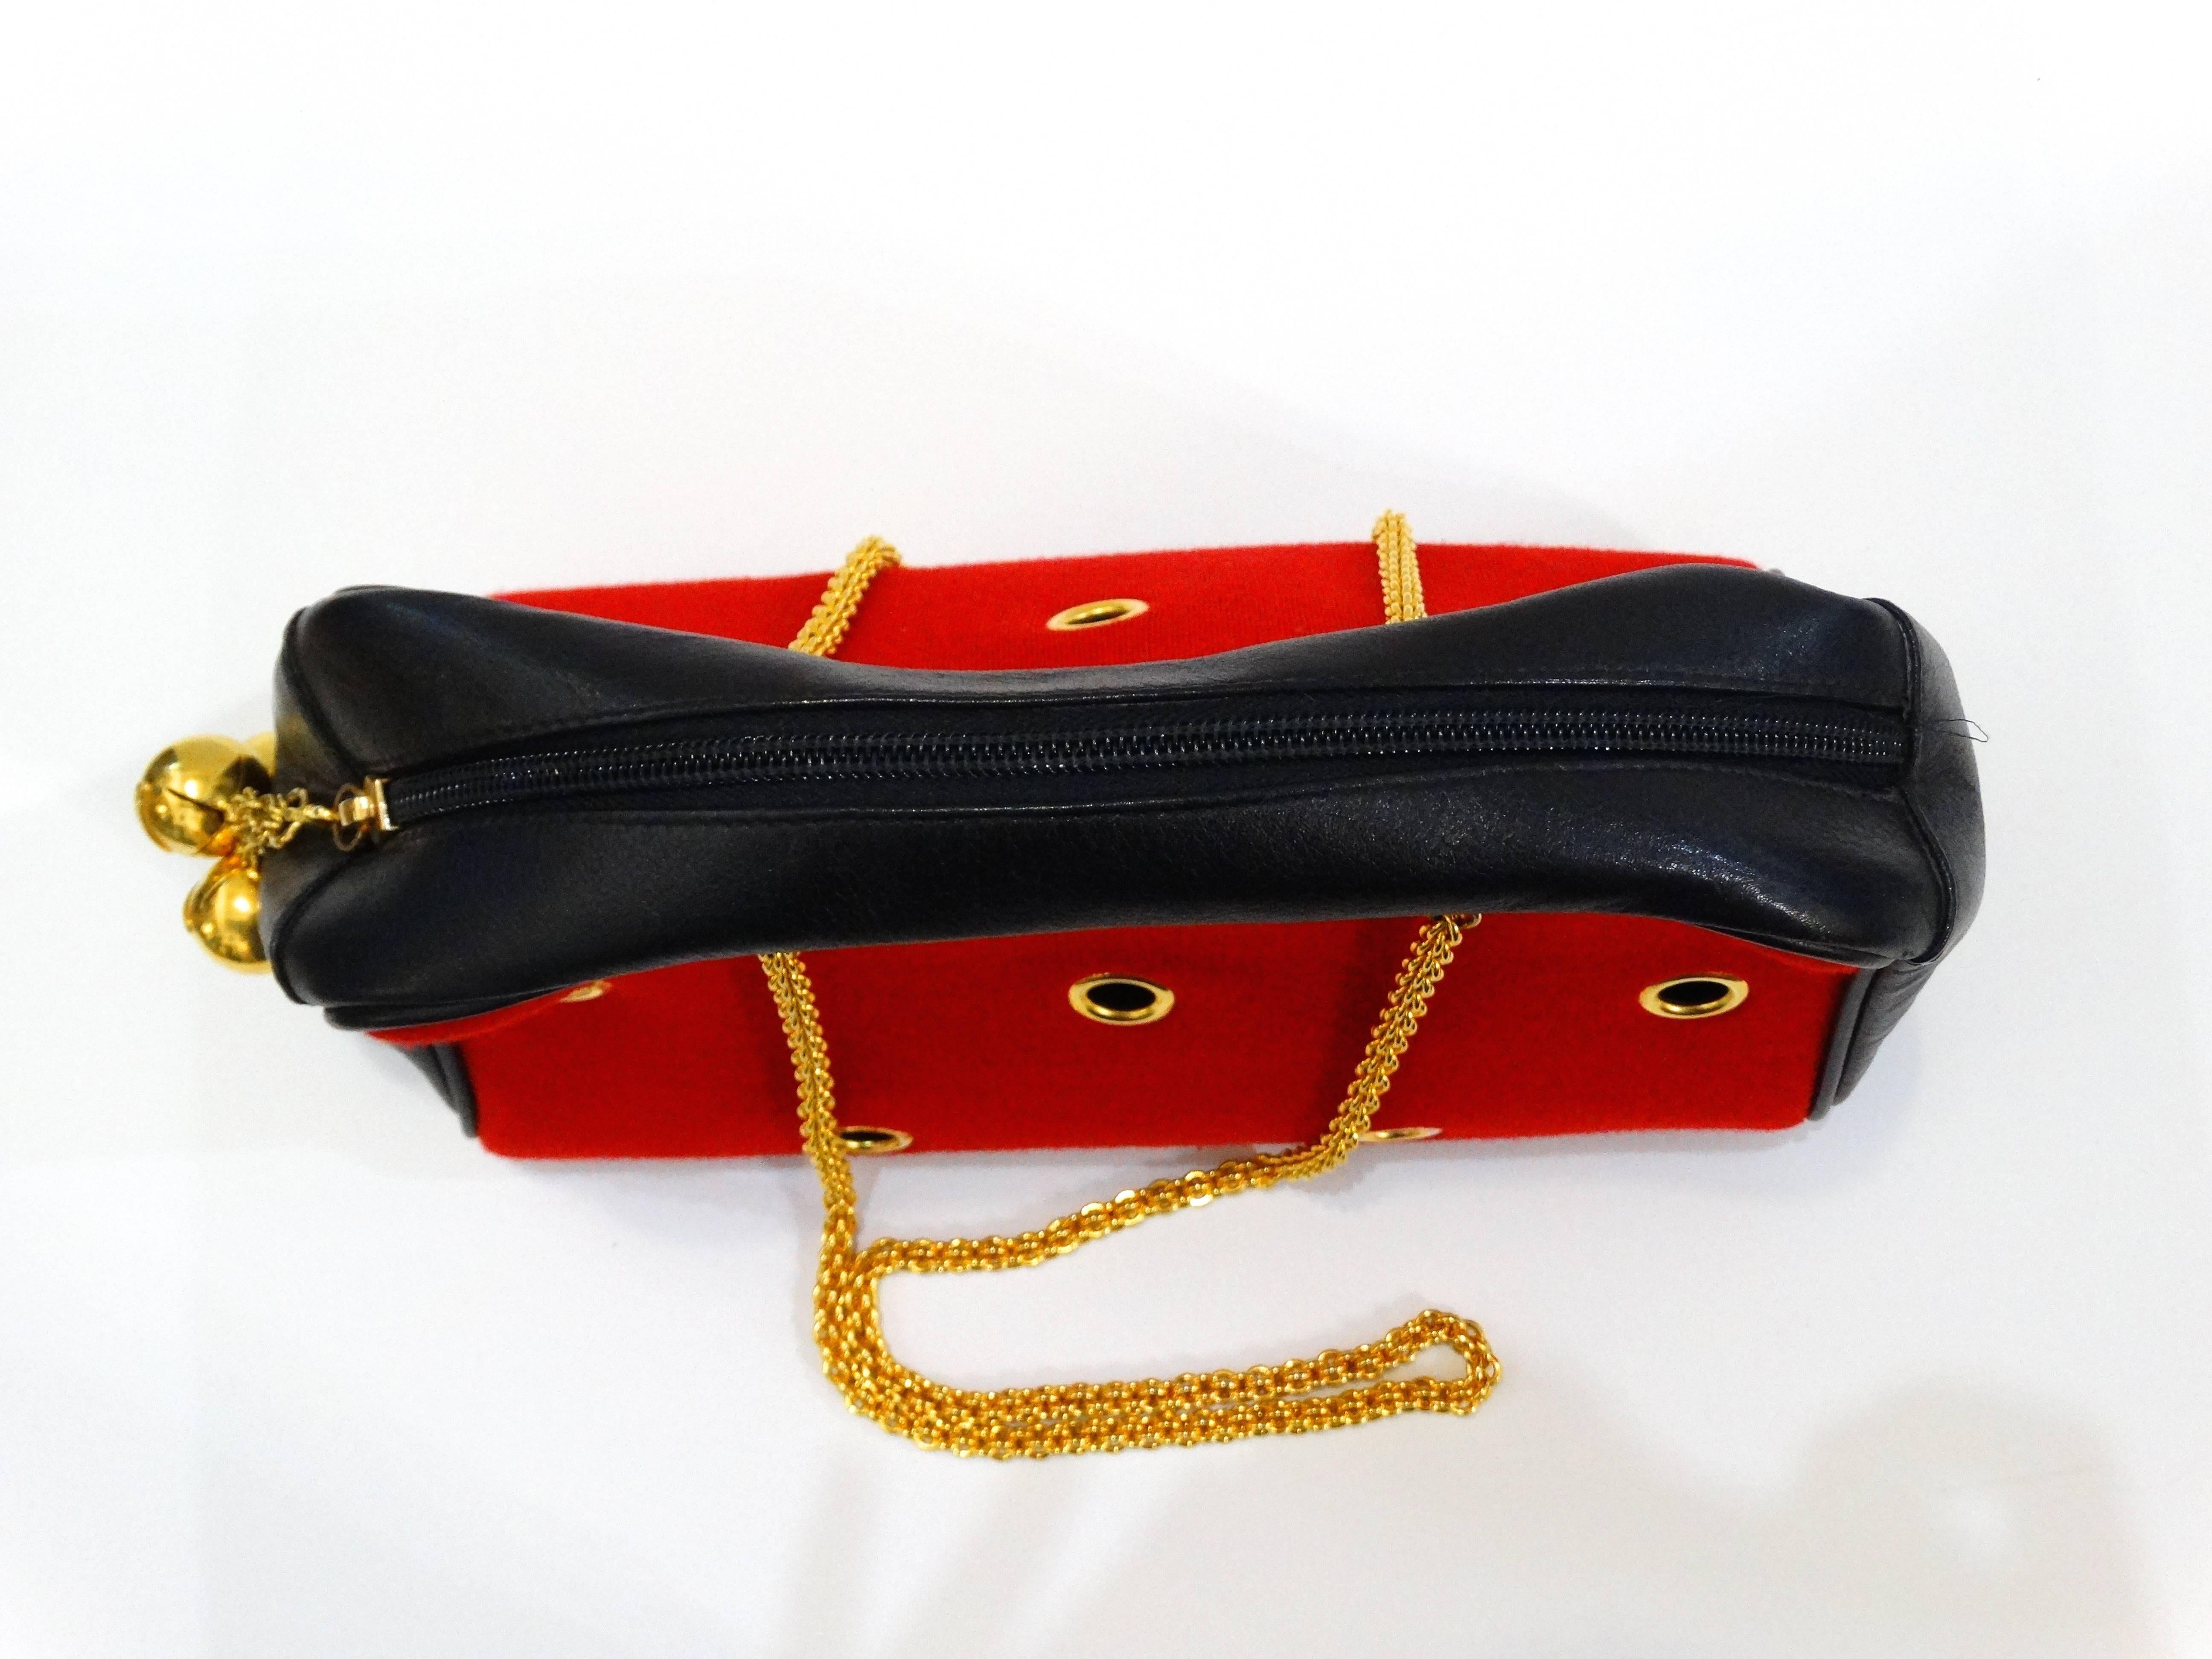 Incredible Moschino Redwall Grommet bag! Red cloth exterior with gold grommet details. Bell charm zipper pull with Moschino signatures. Long gold twisted chain straps. Great size 14inches x 8 inches x 4 inches 